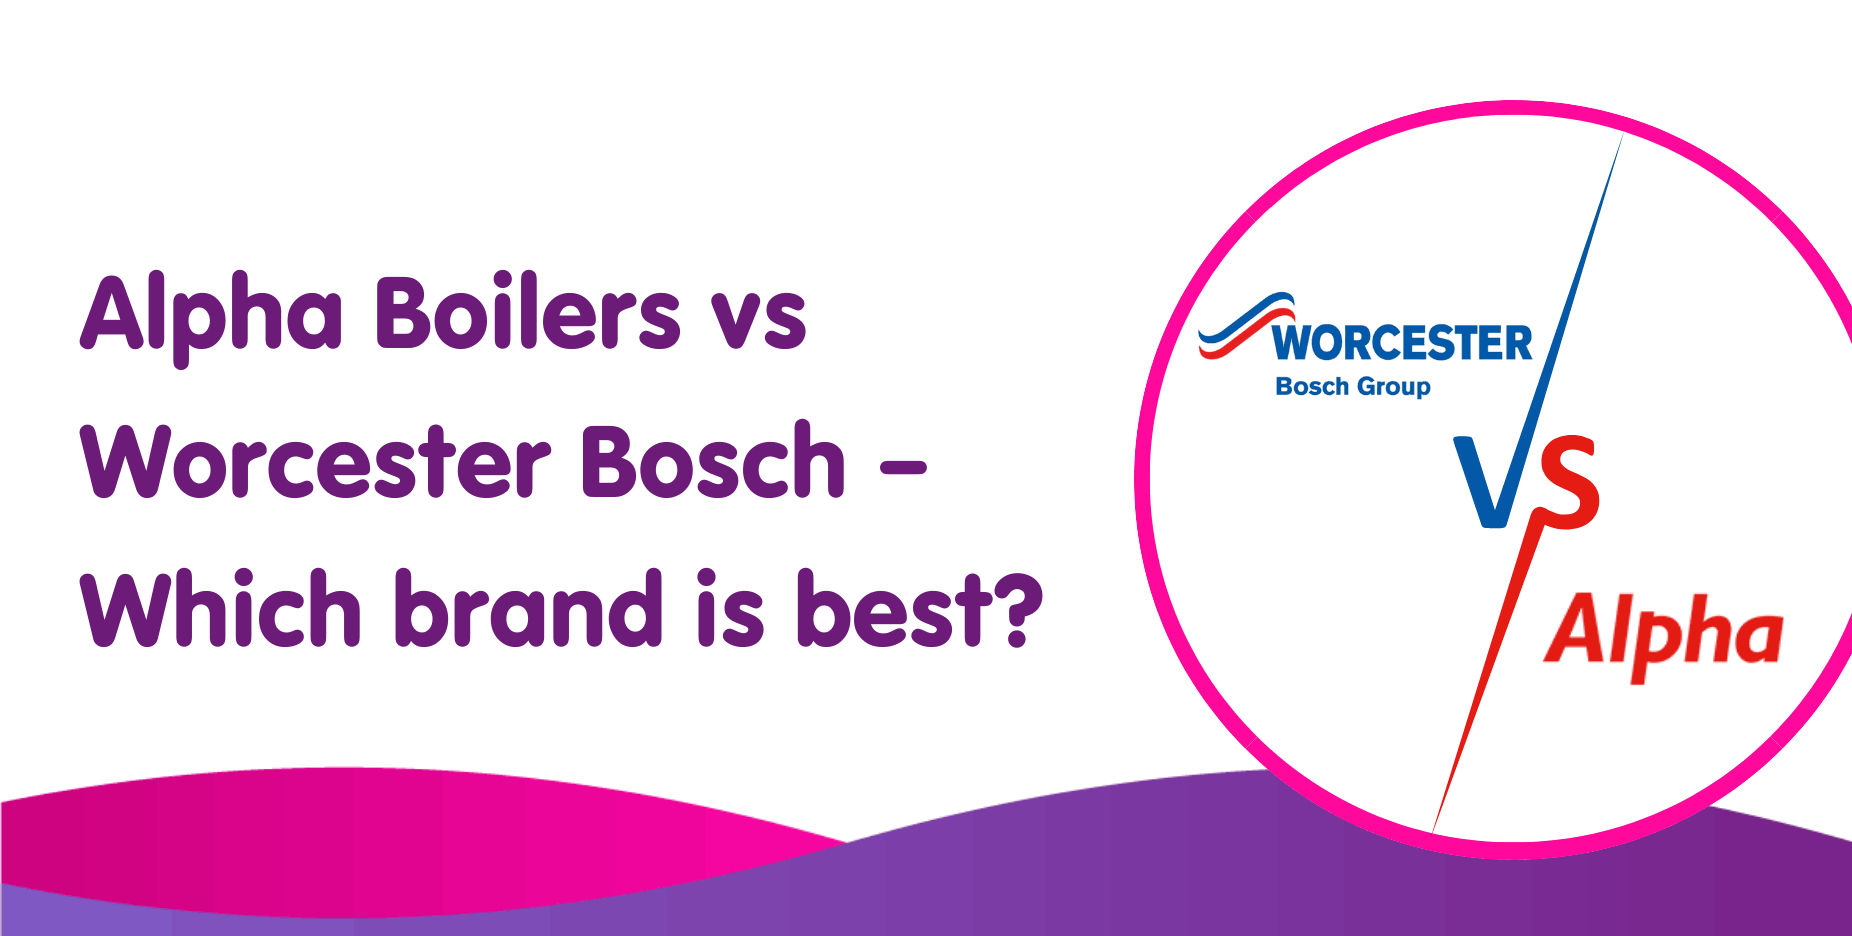 Alpha Boilers vs Worcester Bosch – Which brand is best